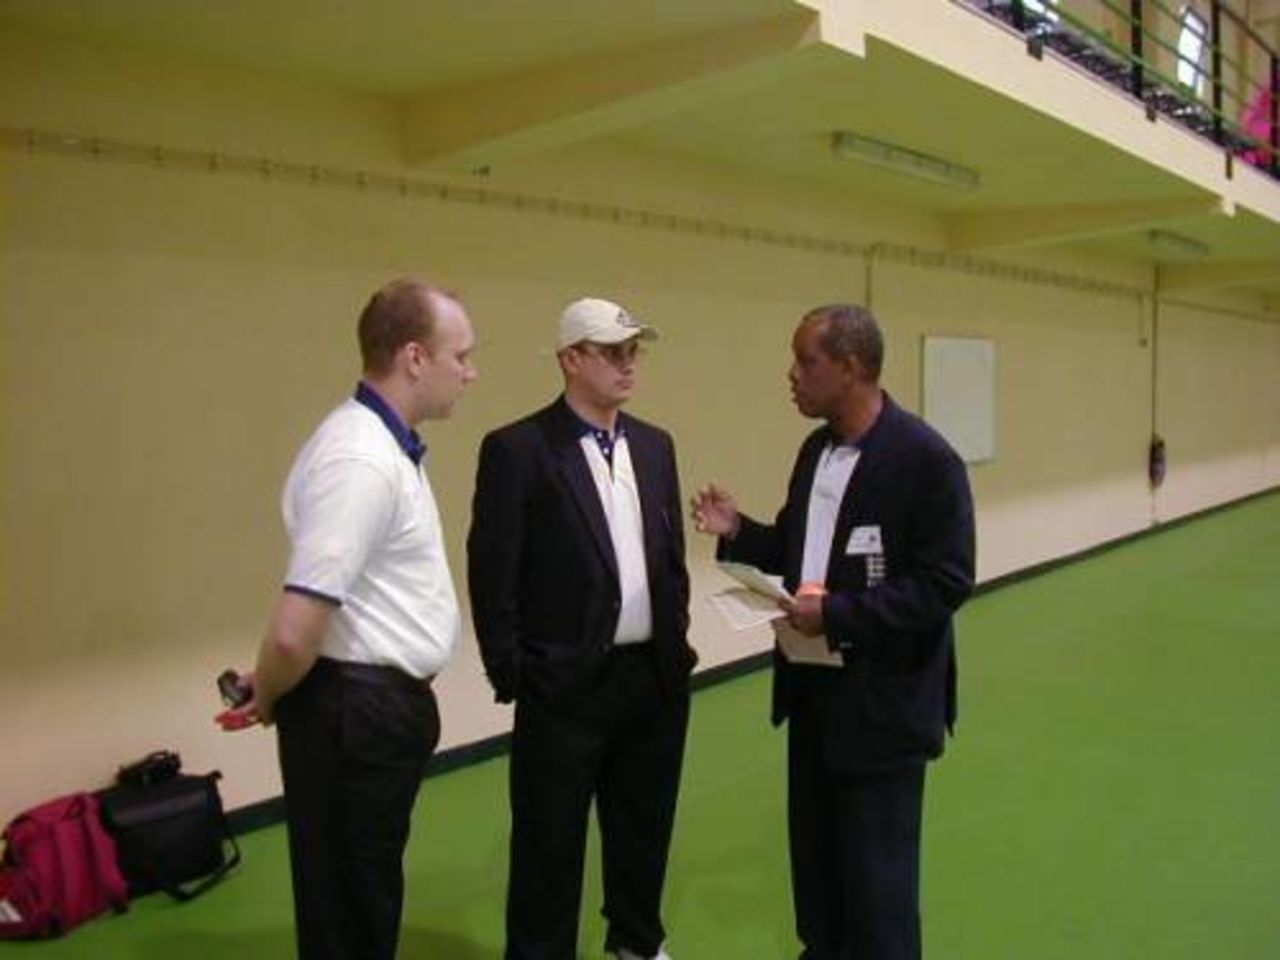 John Holder (right) briefing other umpires at the Indoor Tournament